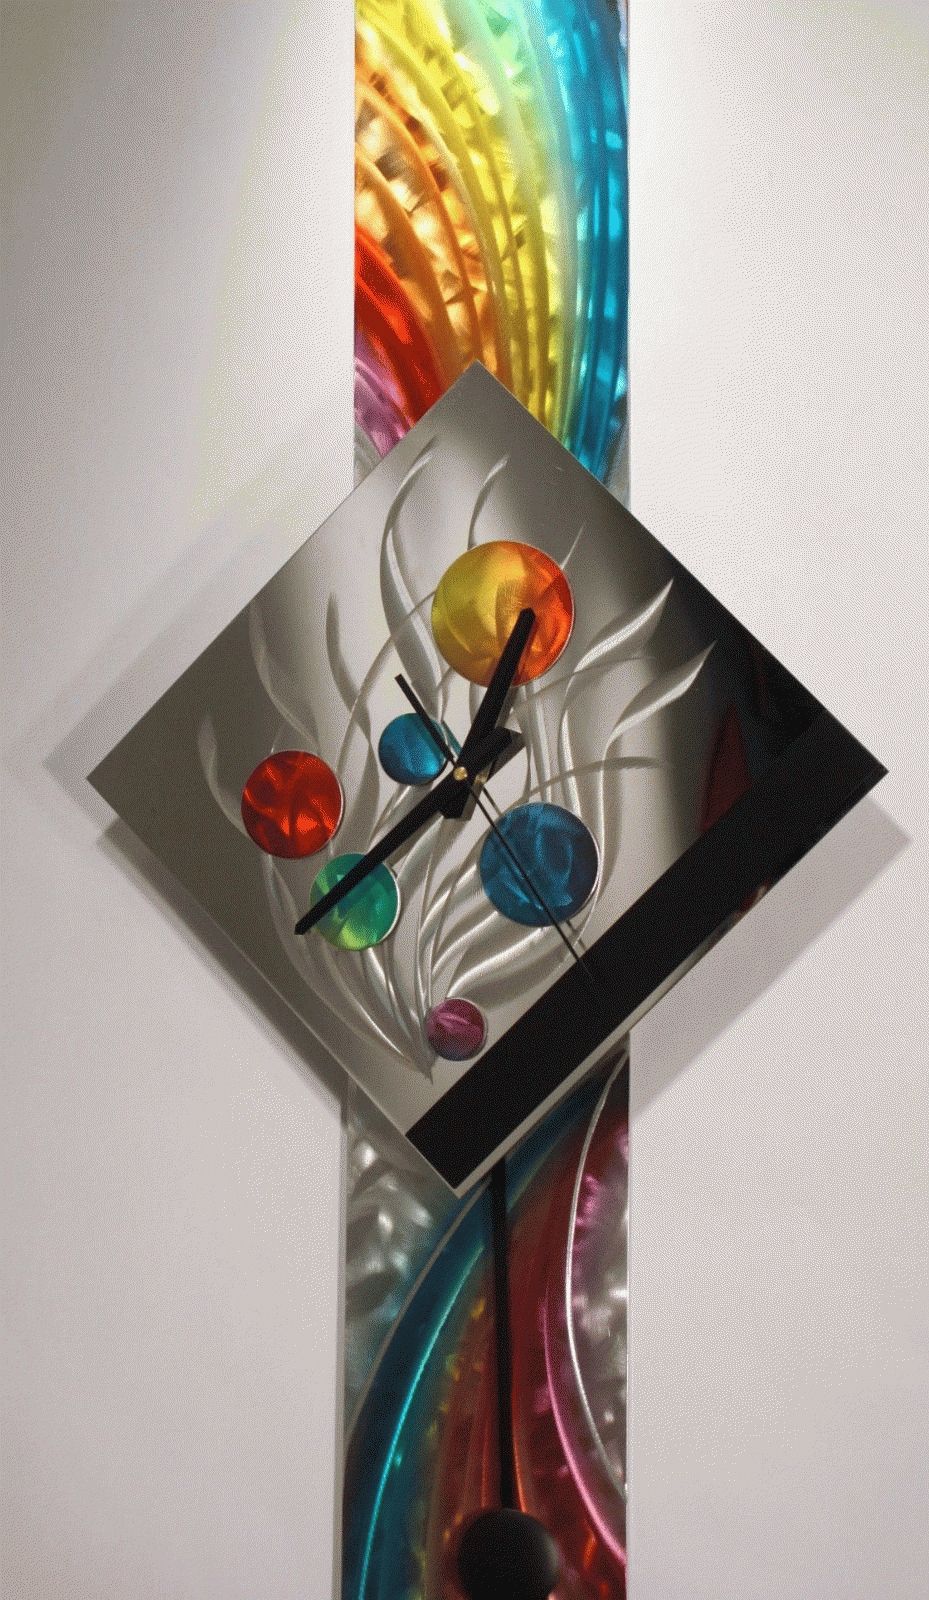 The Best Glass And Metal Wall Art Pertaining To Latest Glass Abstract Wall Art (View 13 of 20)